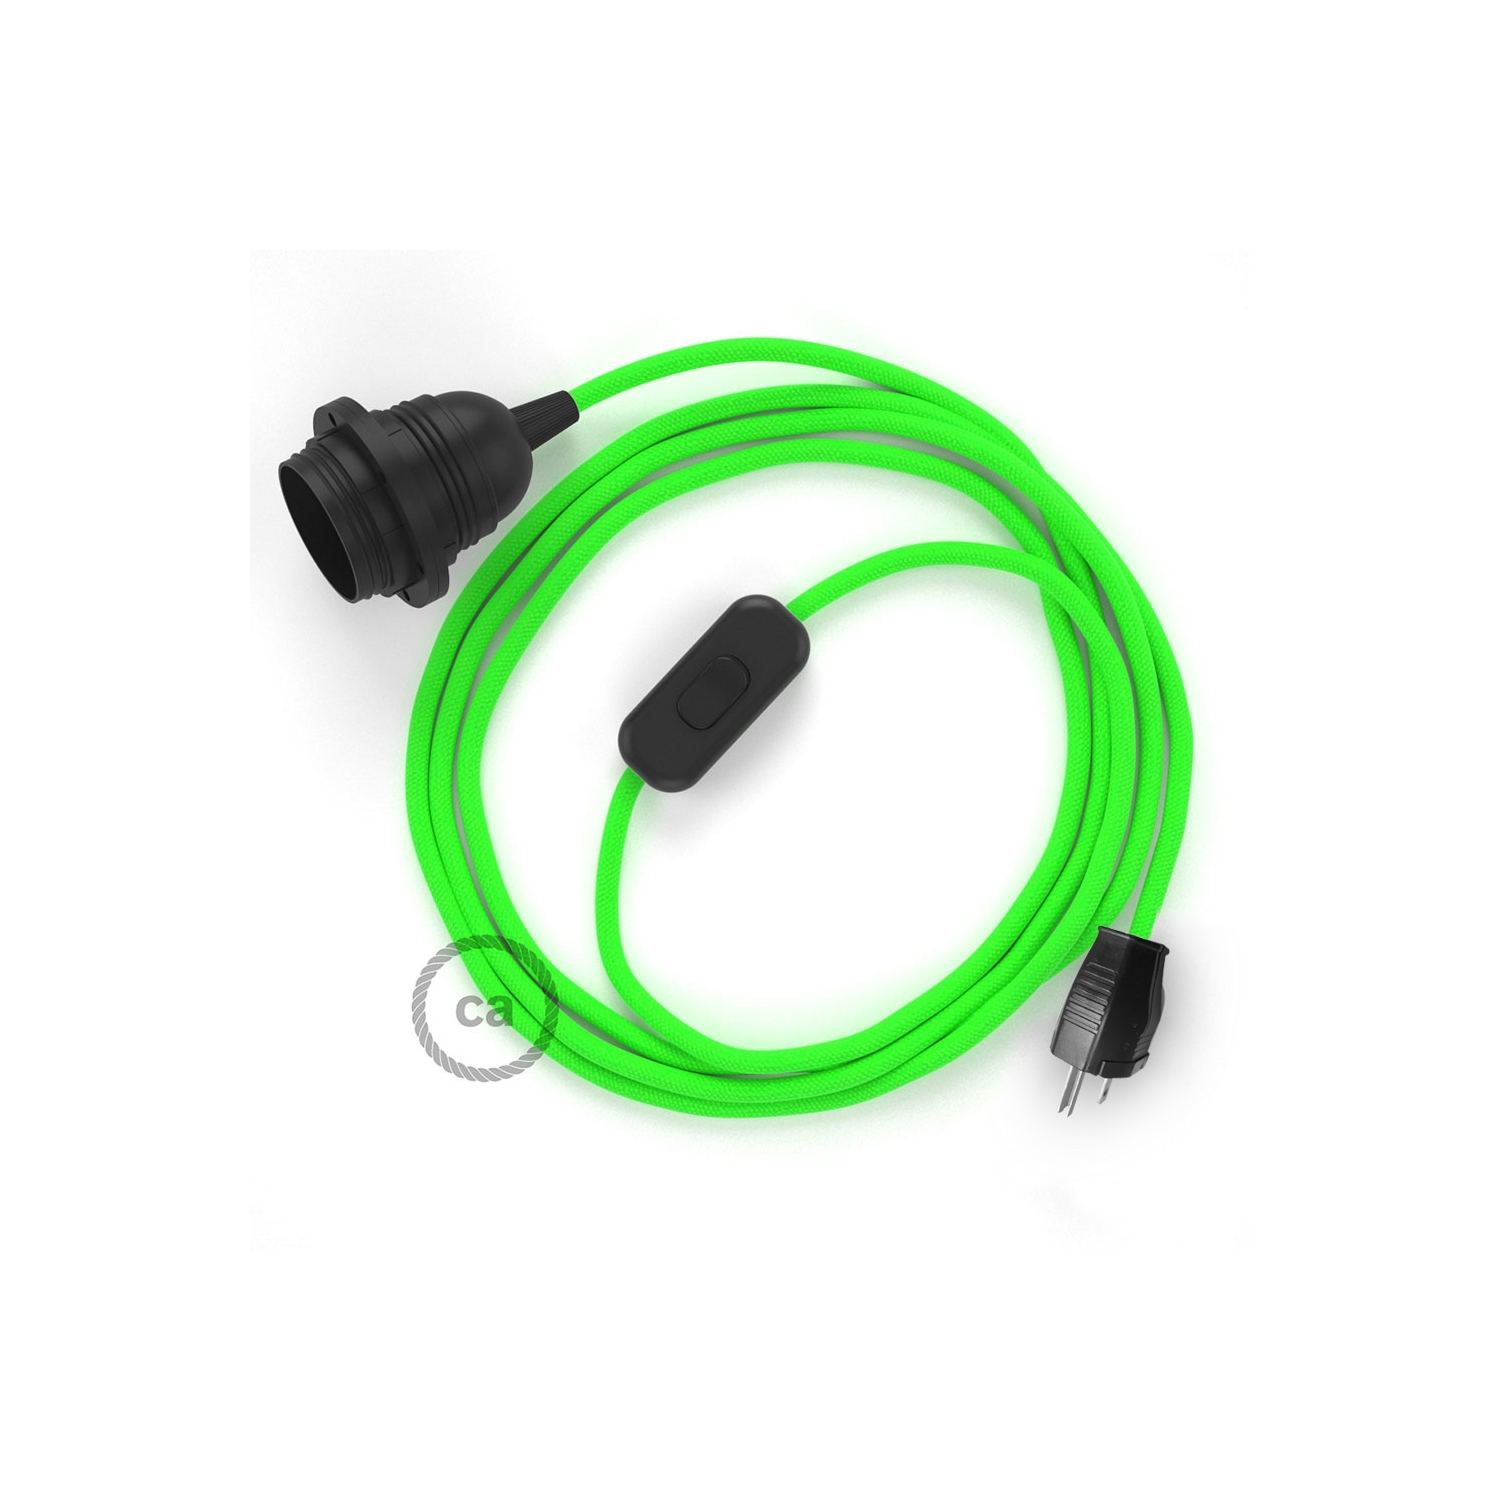 Plug-in Pendant with inline switch | RF06 Neon Green